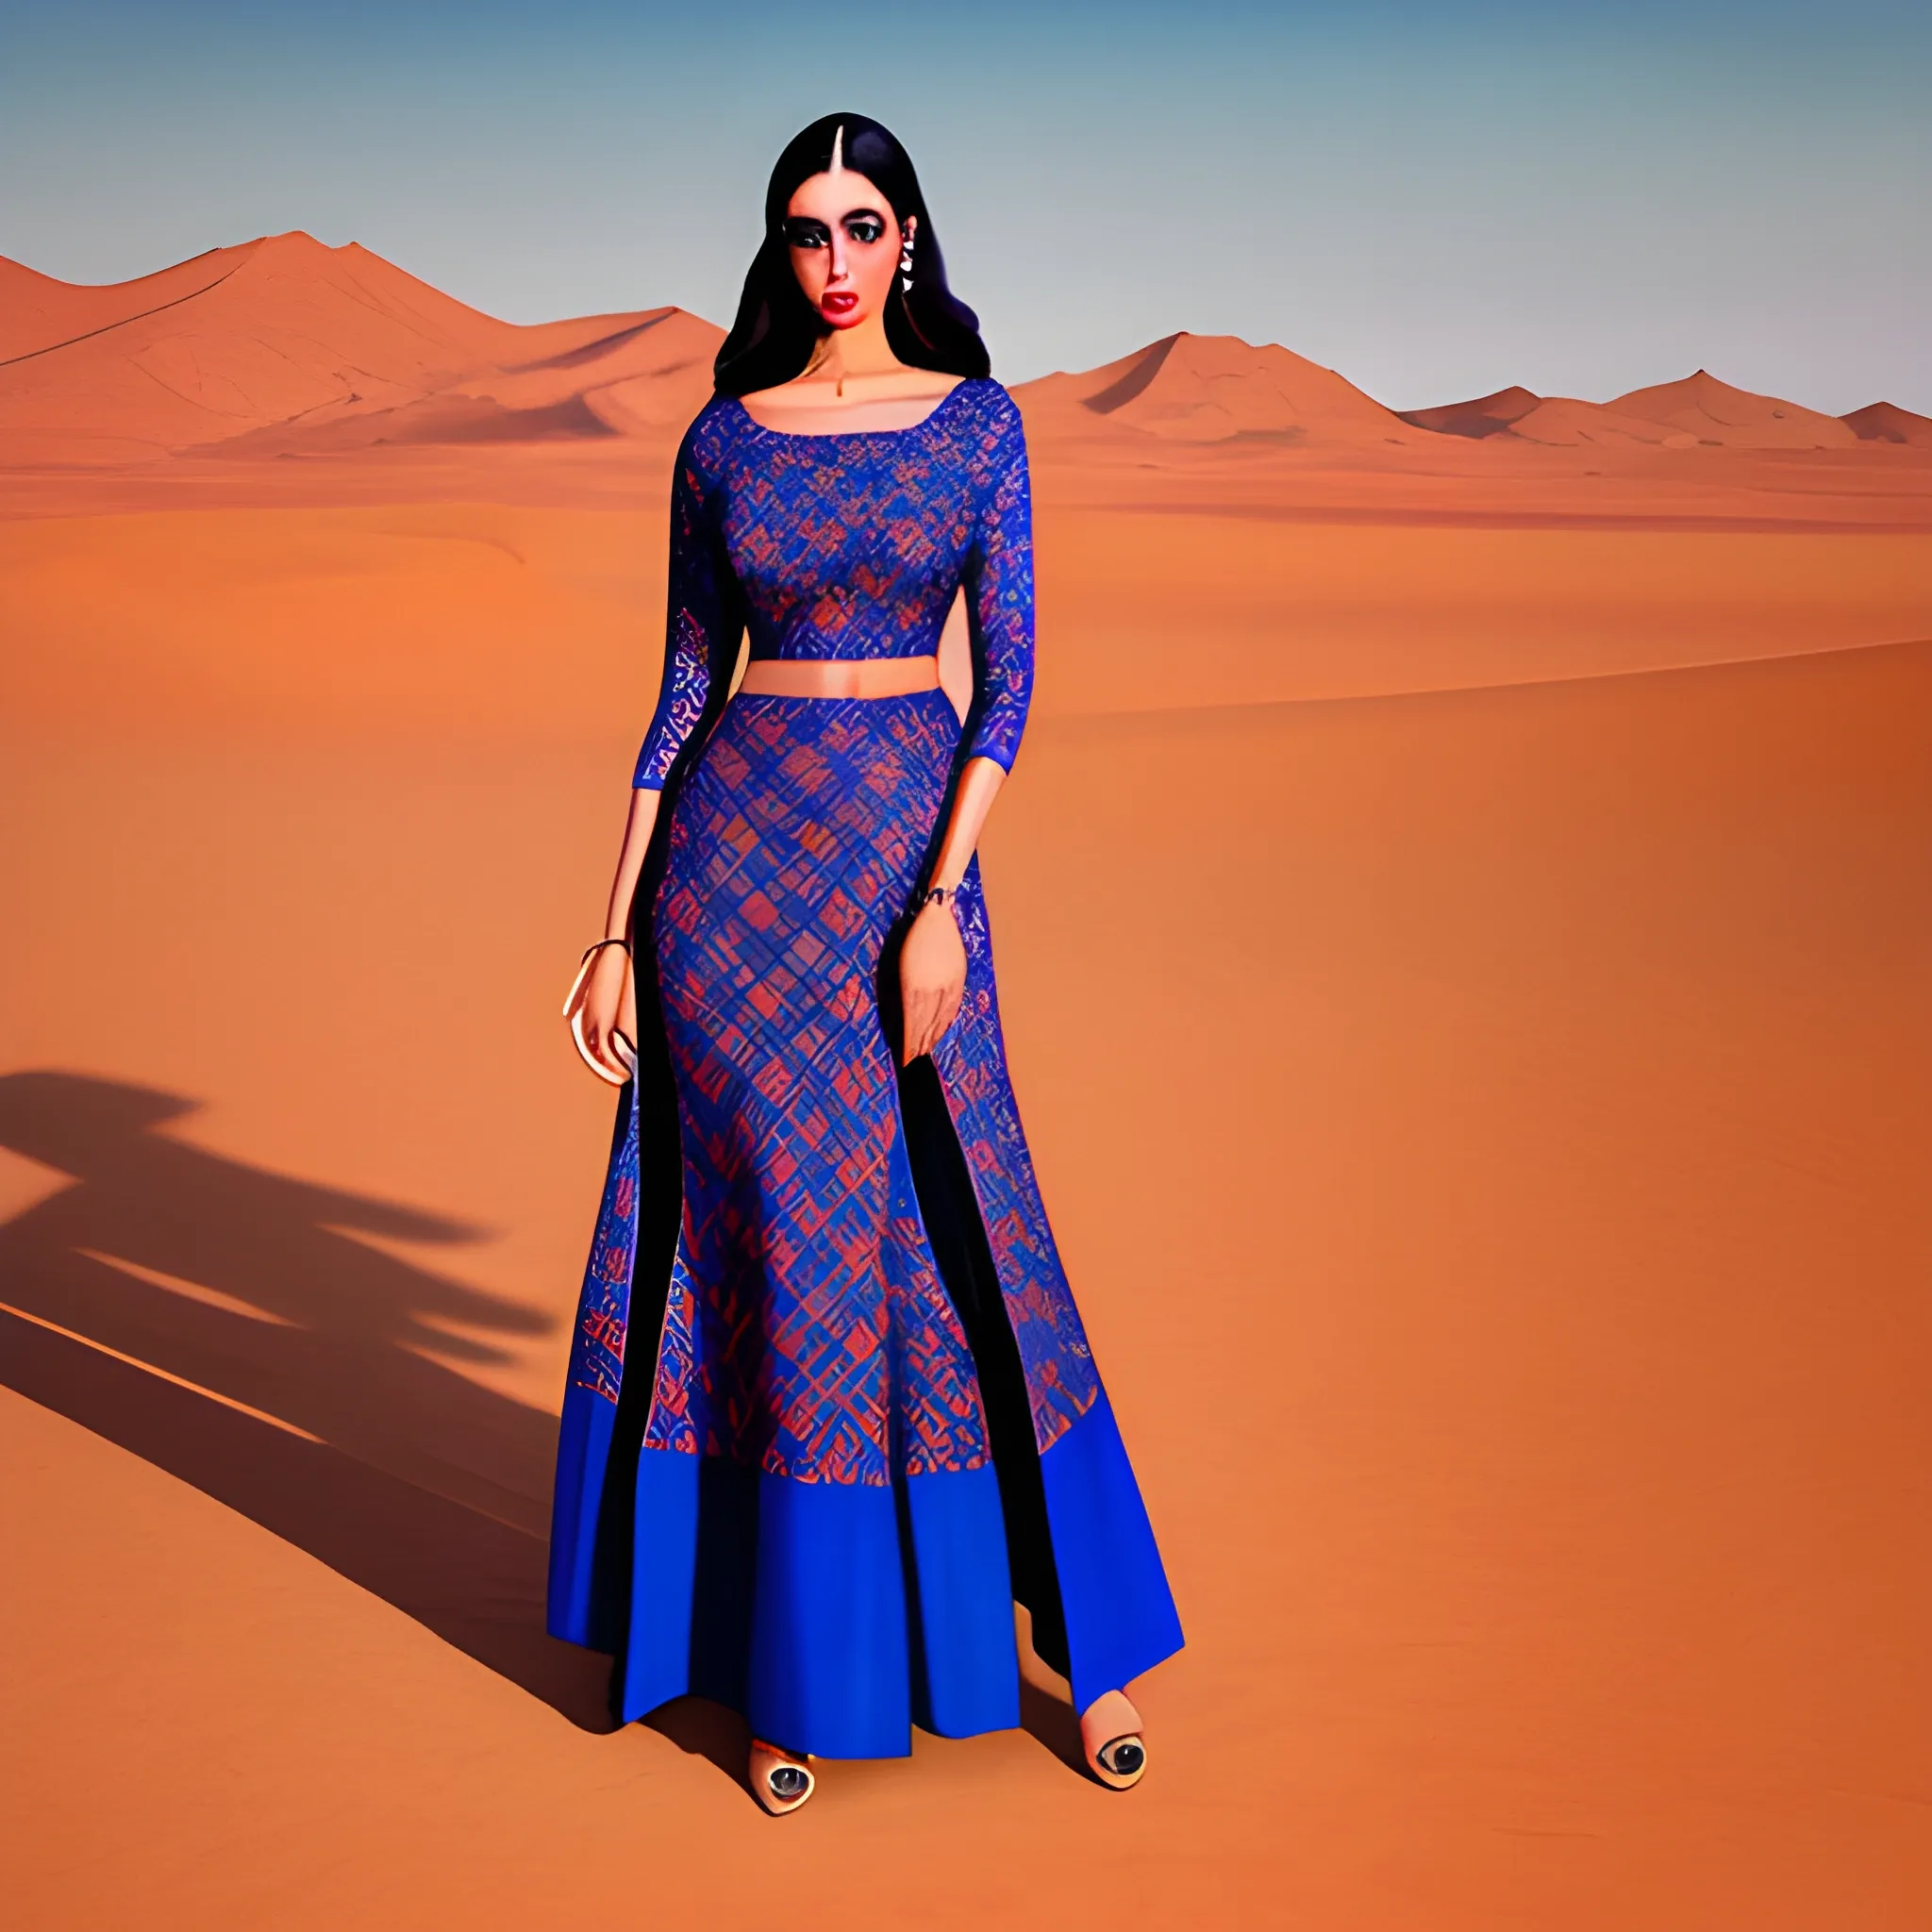 beautiful girl fair and blue eyes wearing Masaba Gupta garment in the middle of the desert

realistic, photograph 